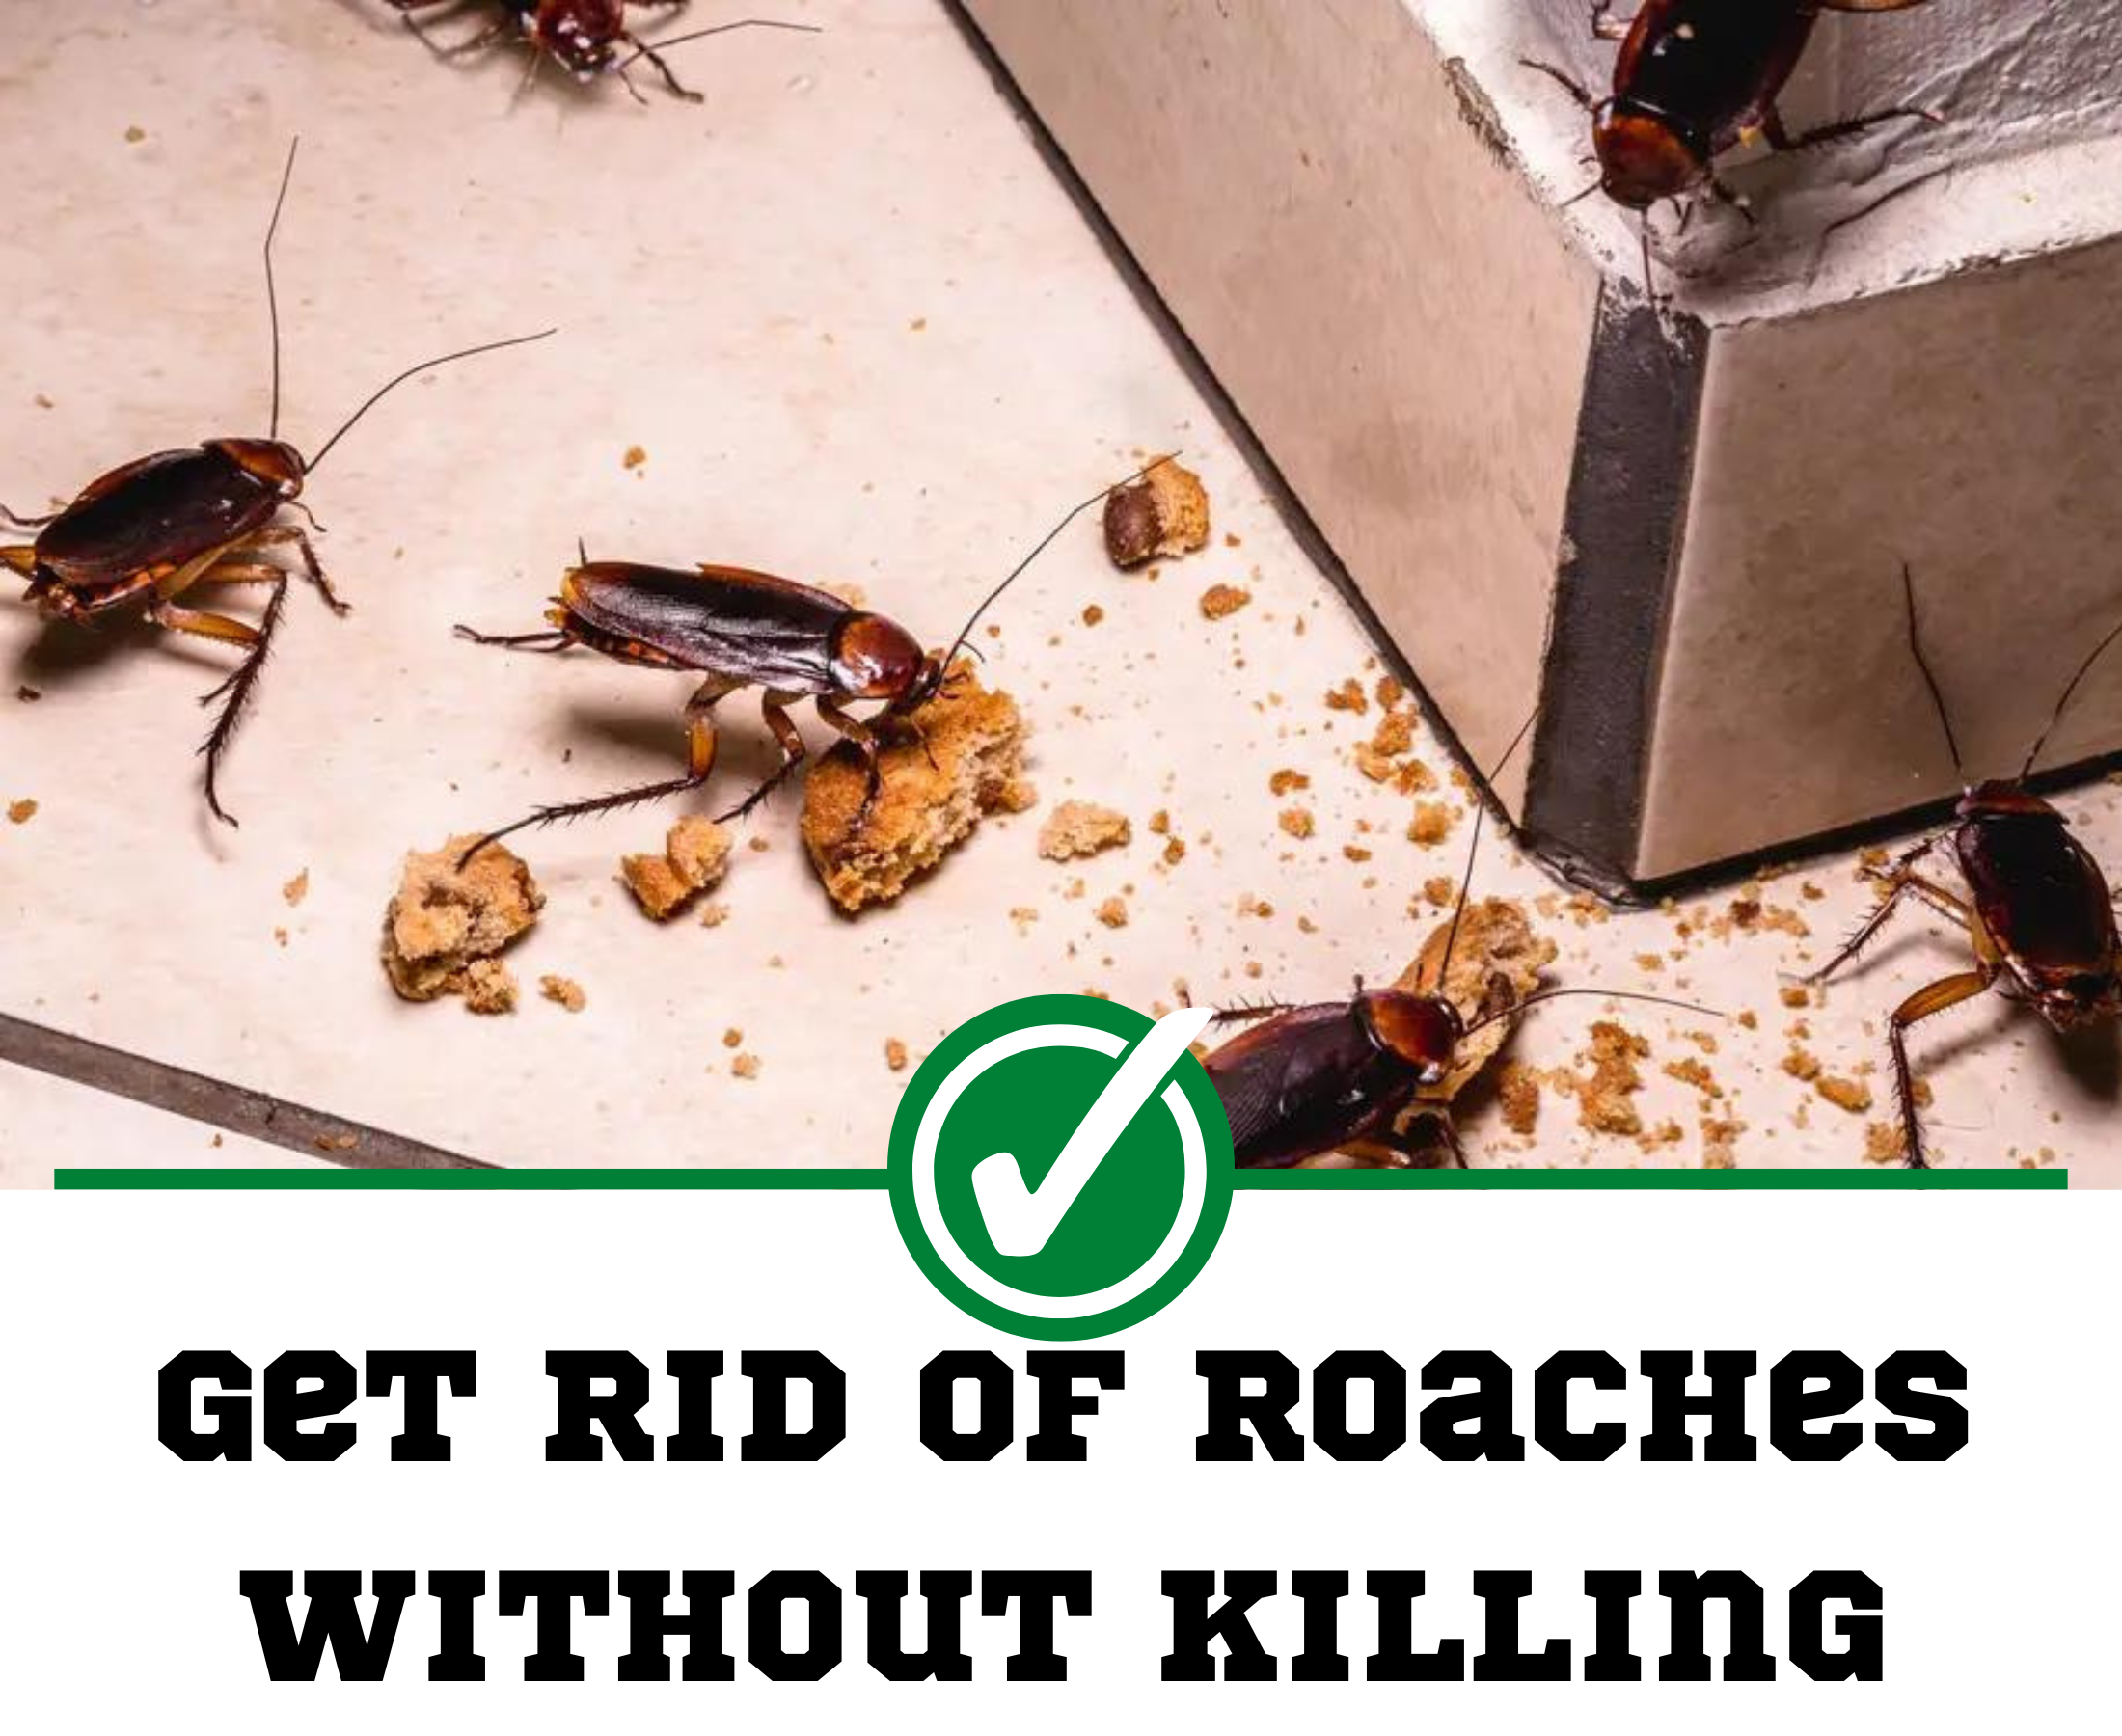 How to get rid of cockroaches without killing them?